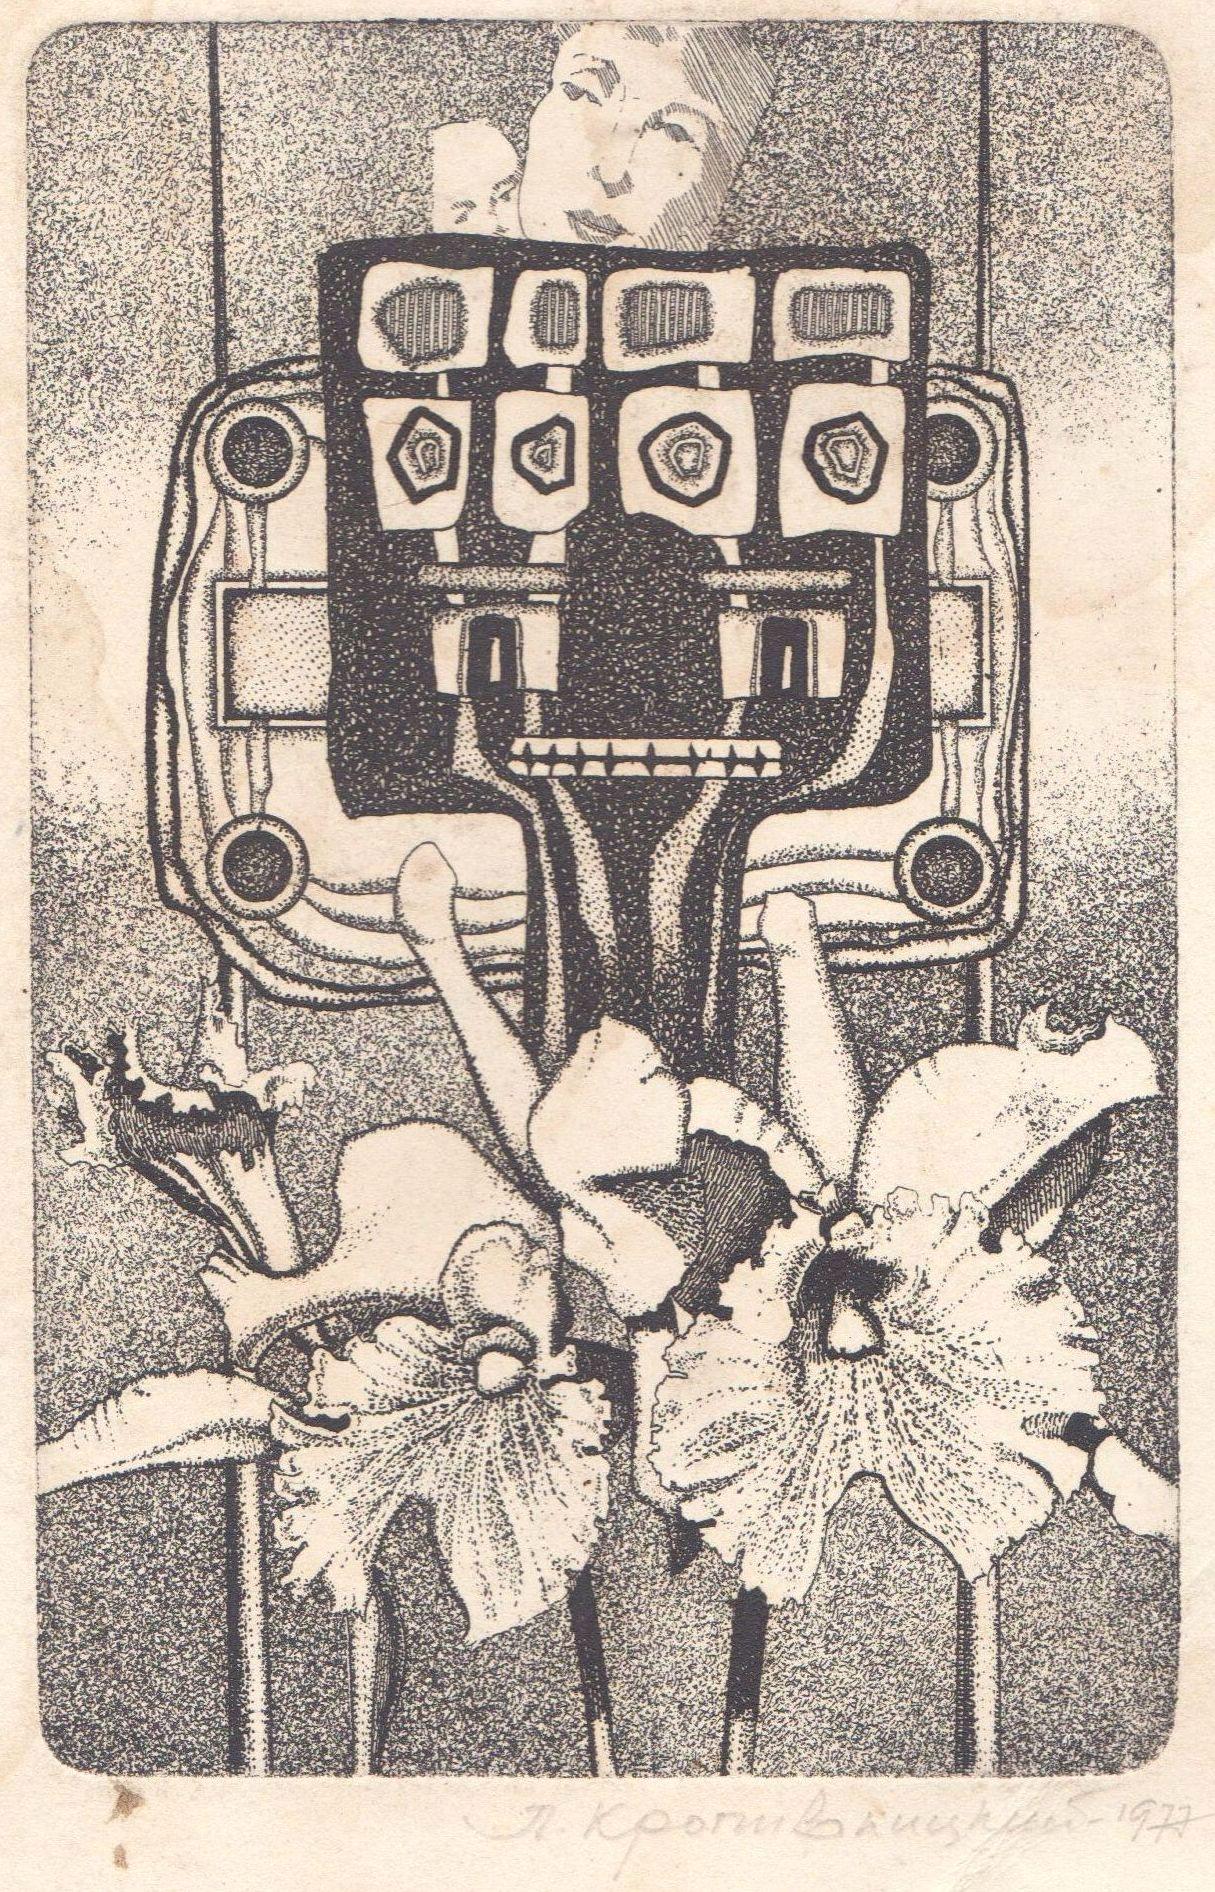 Robot and orchids. 1977, paper, etching, 16x10 cm